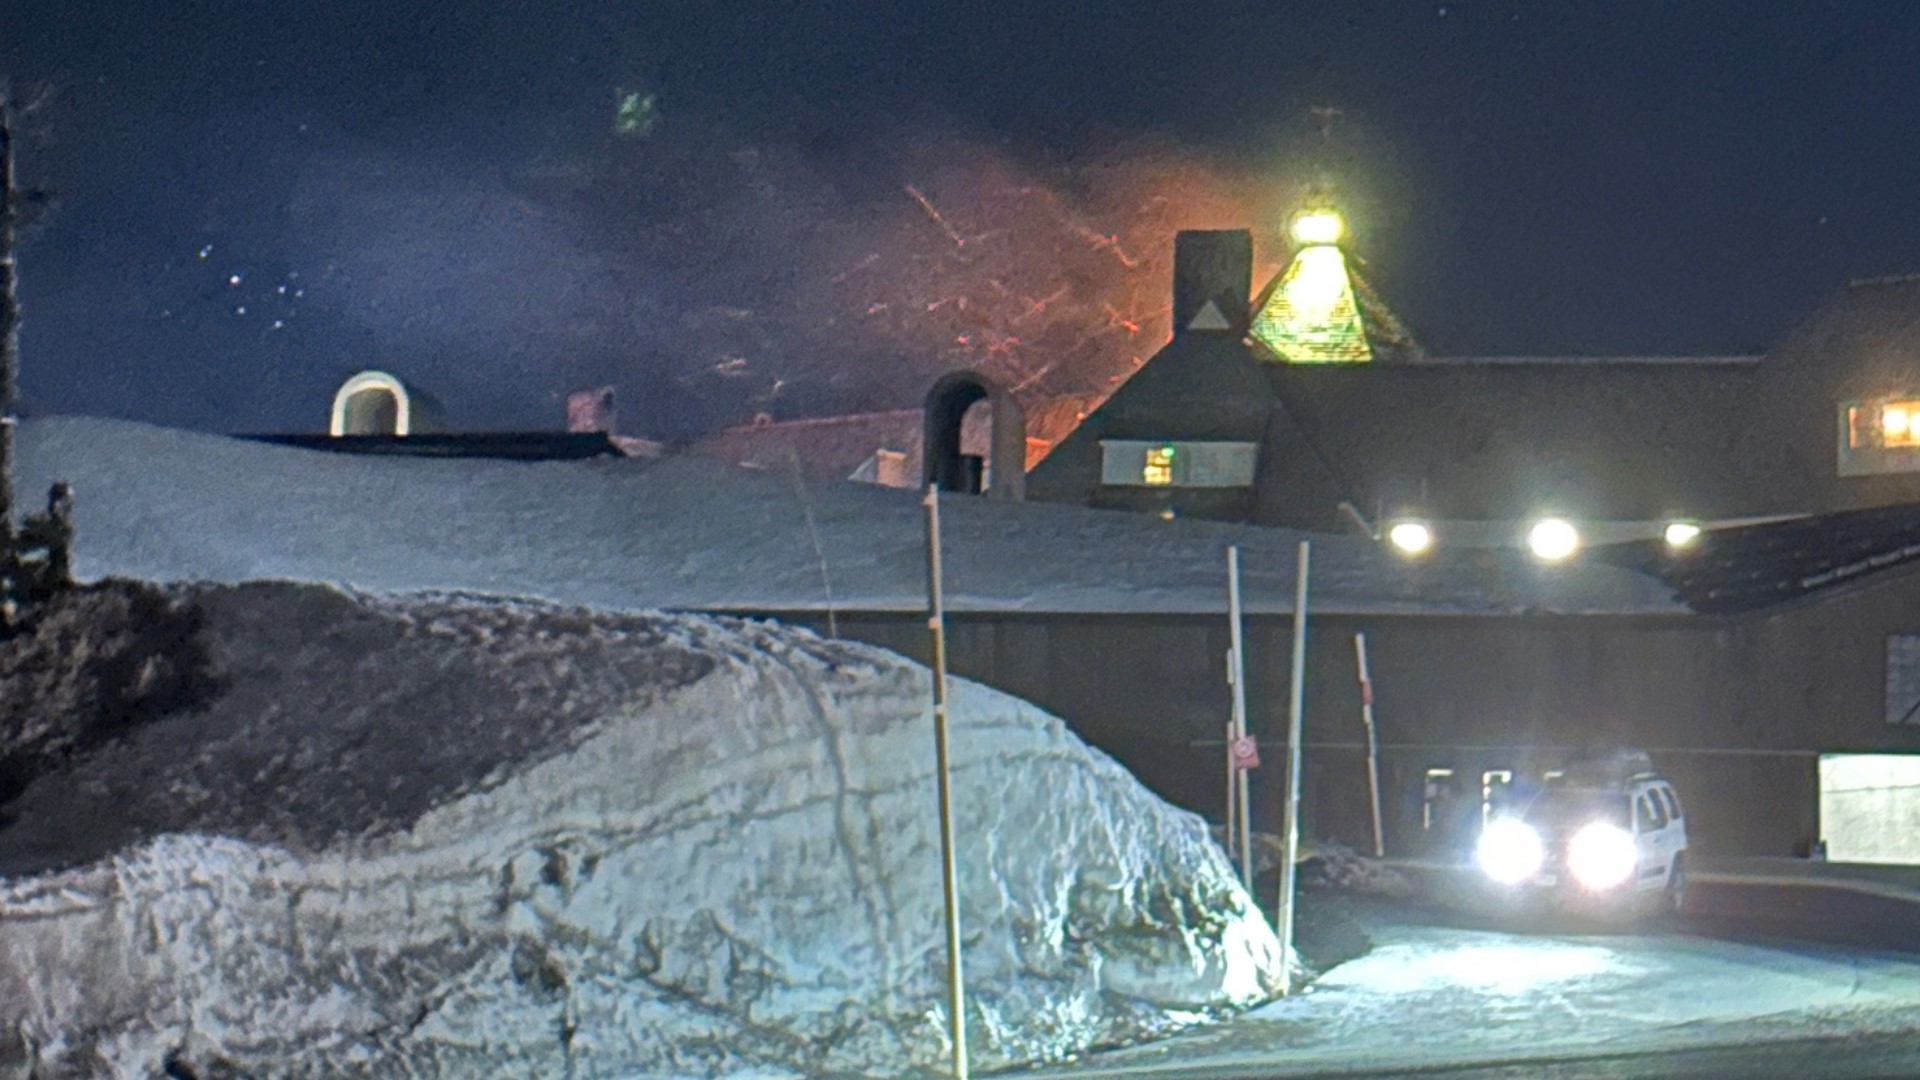 Fire Erupts at Timberline Lodge on Mount Hood